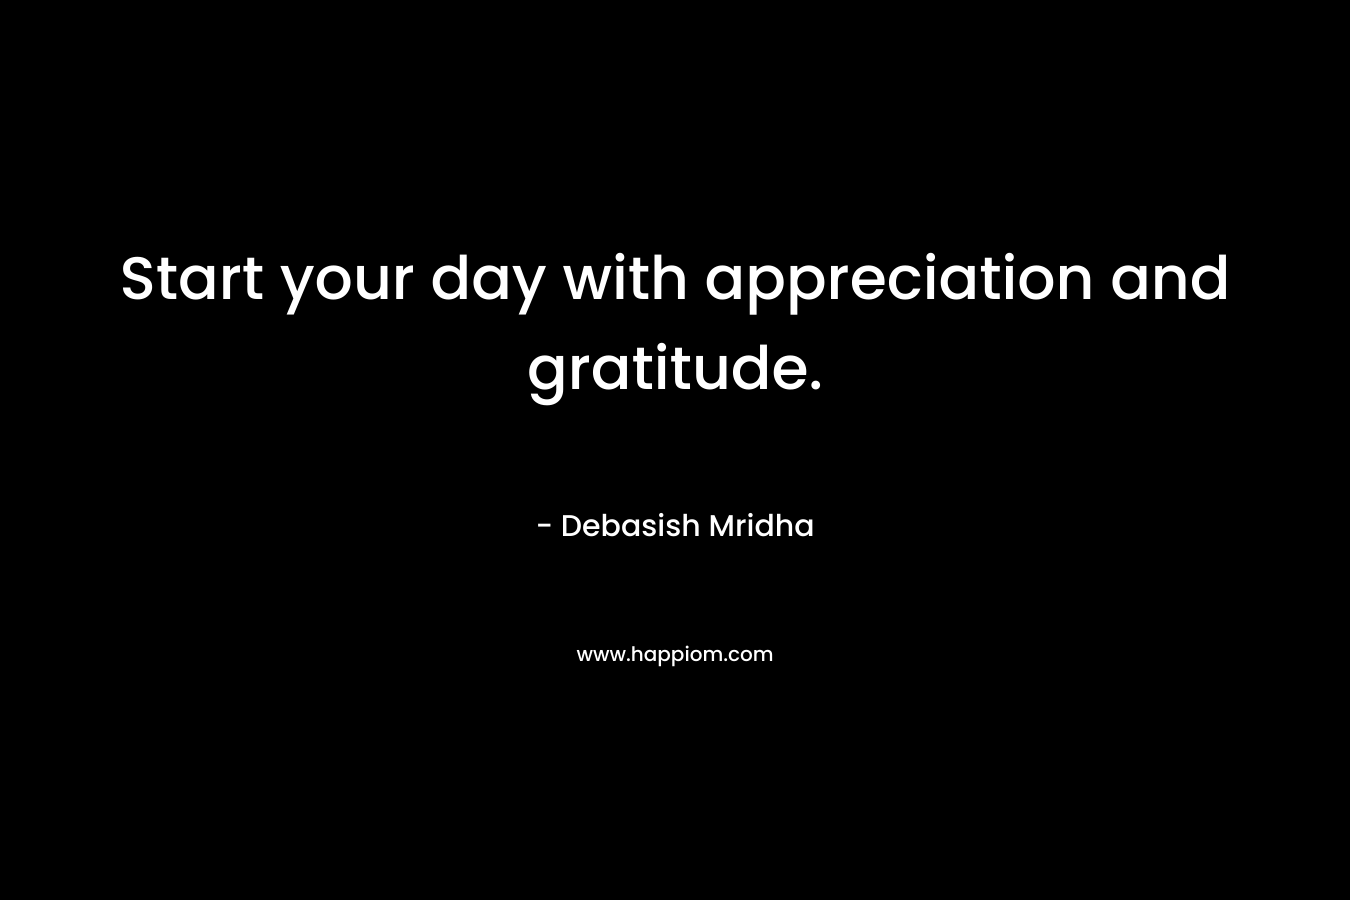 Start your day with appreciation and gratitude.